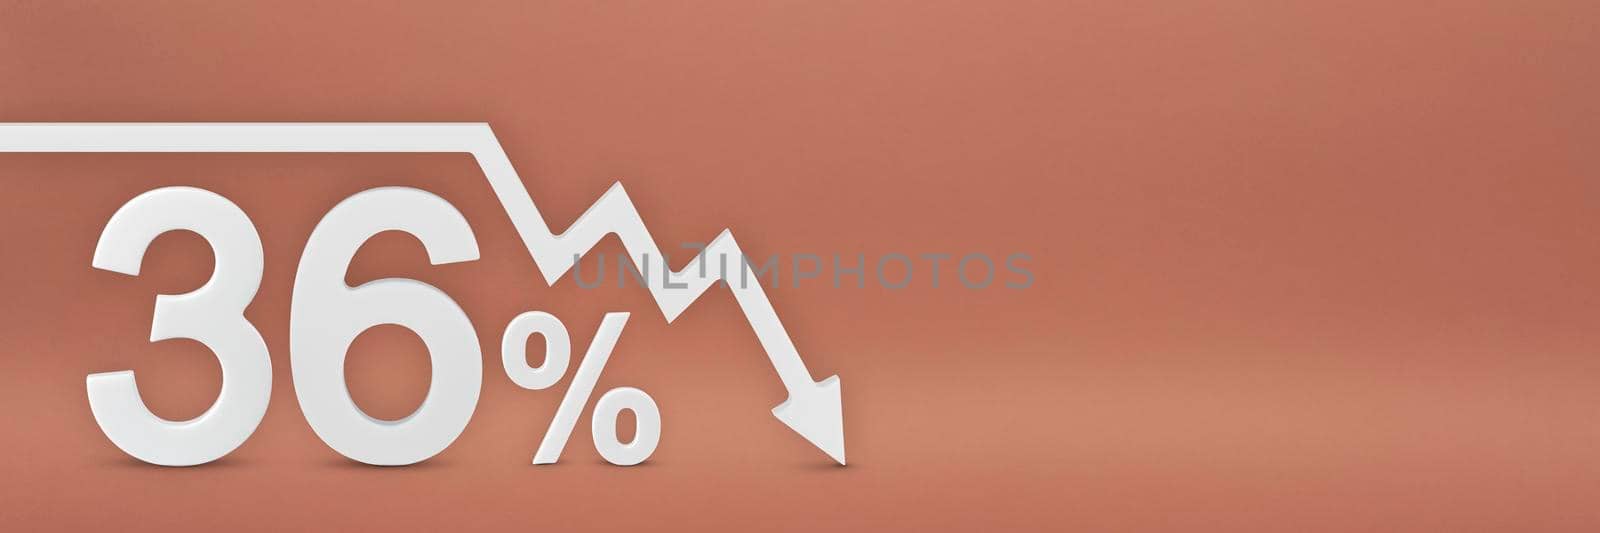 thirty-six percent, the arrow on the graph is pointing down. Stock market crash, bear market, inflation.Economic collapse, collapse of stocks.3d banner,36 percent discount sign on a red background. by SERSOL